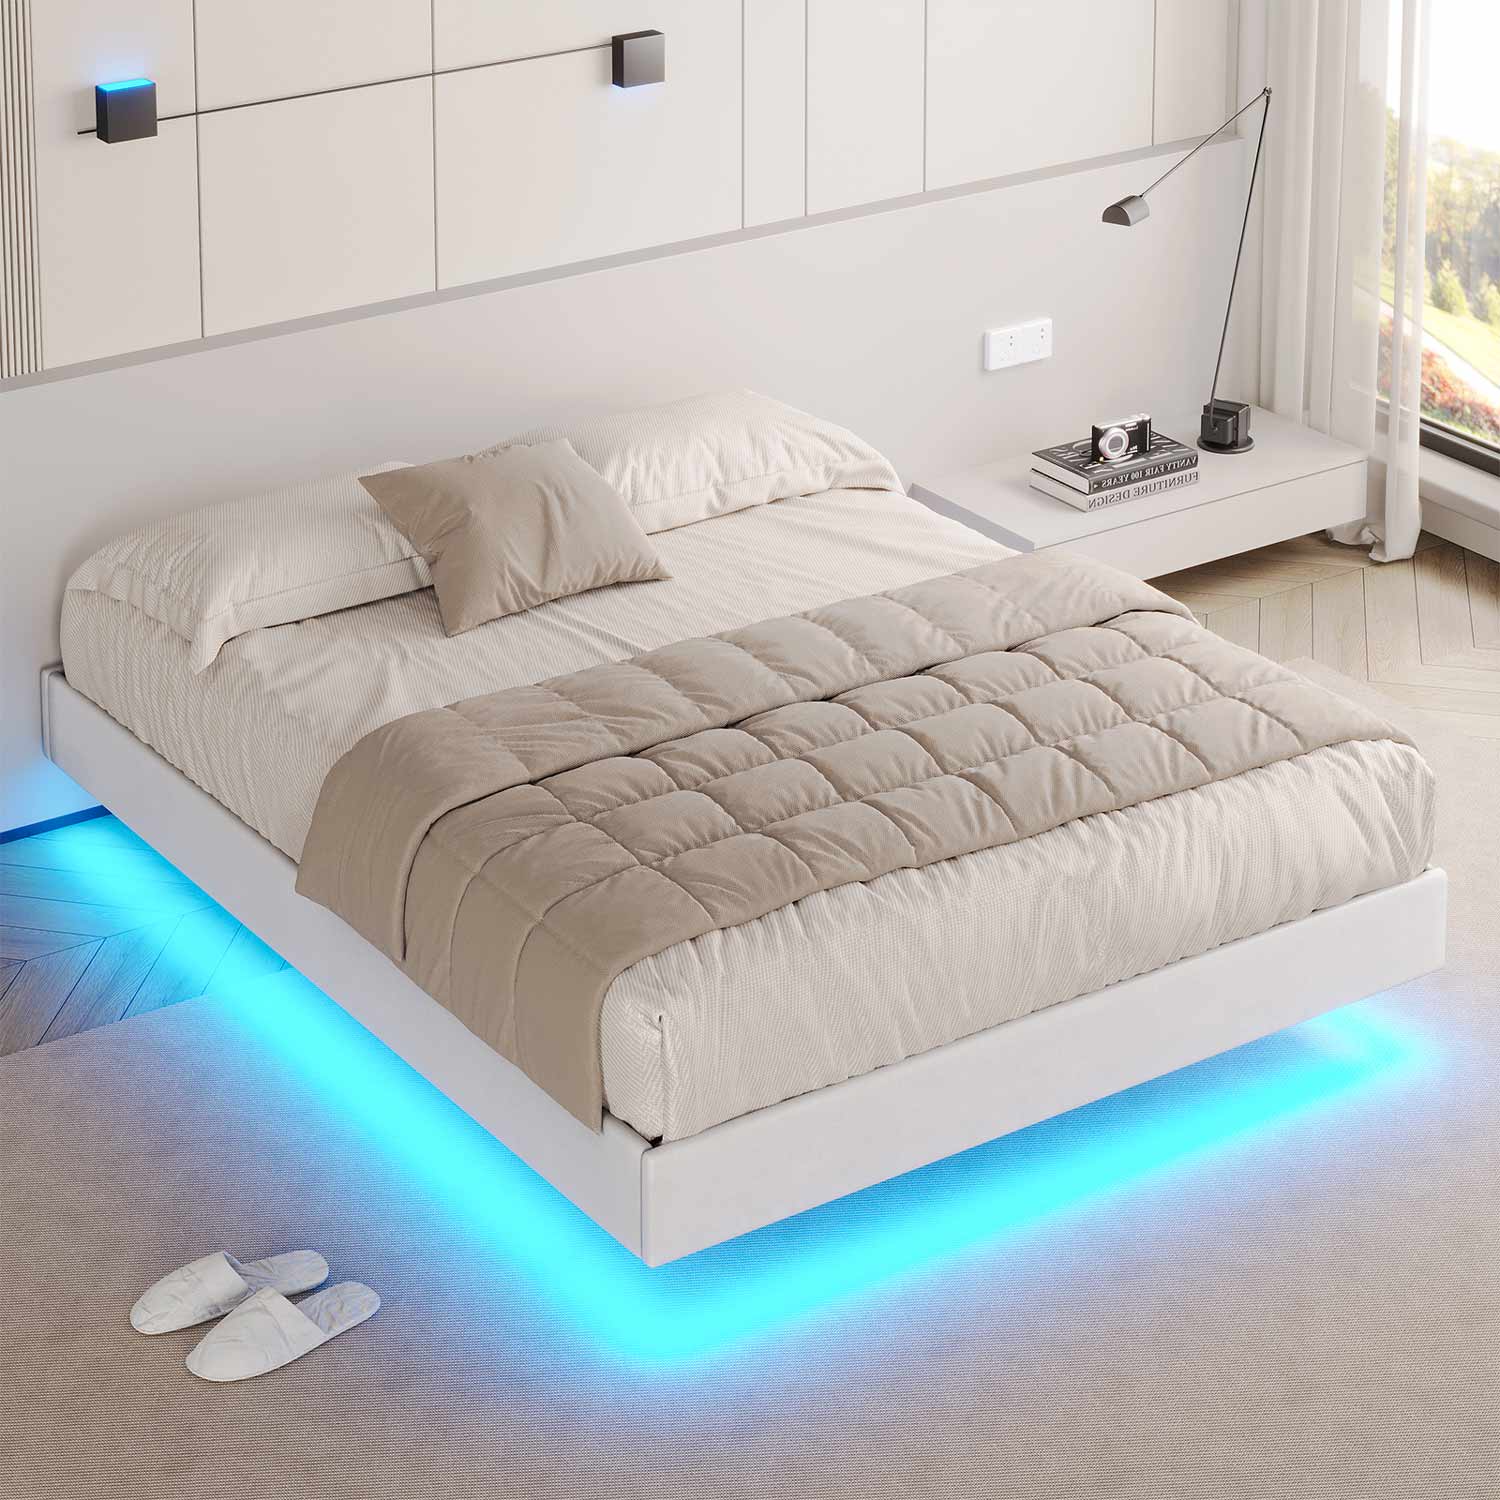 https://www.sikaic.com/cdn/shop/files/sikaic-beds-bed-frames-queen-size-floating-led-upholstered-bed-frame-with-low-profile-platform-no-headboard-white-dj503201-2-43475823984948.jpg?v=1703404264